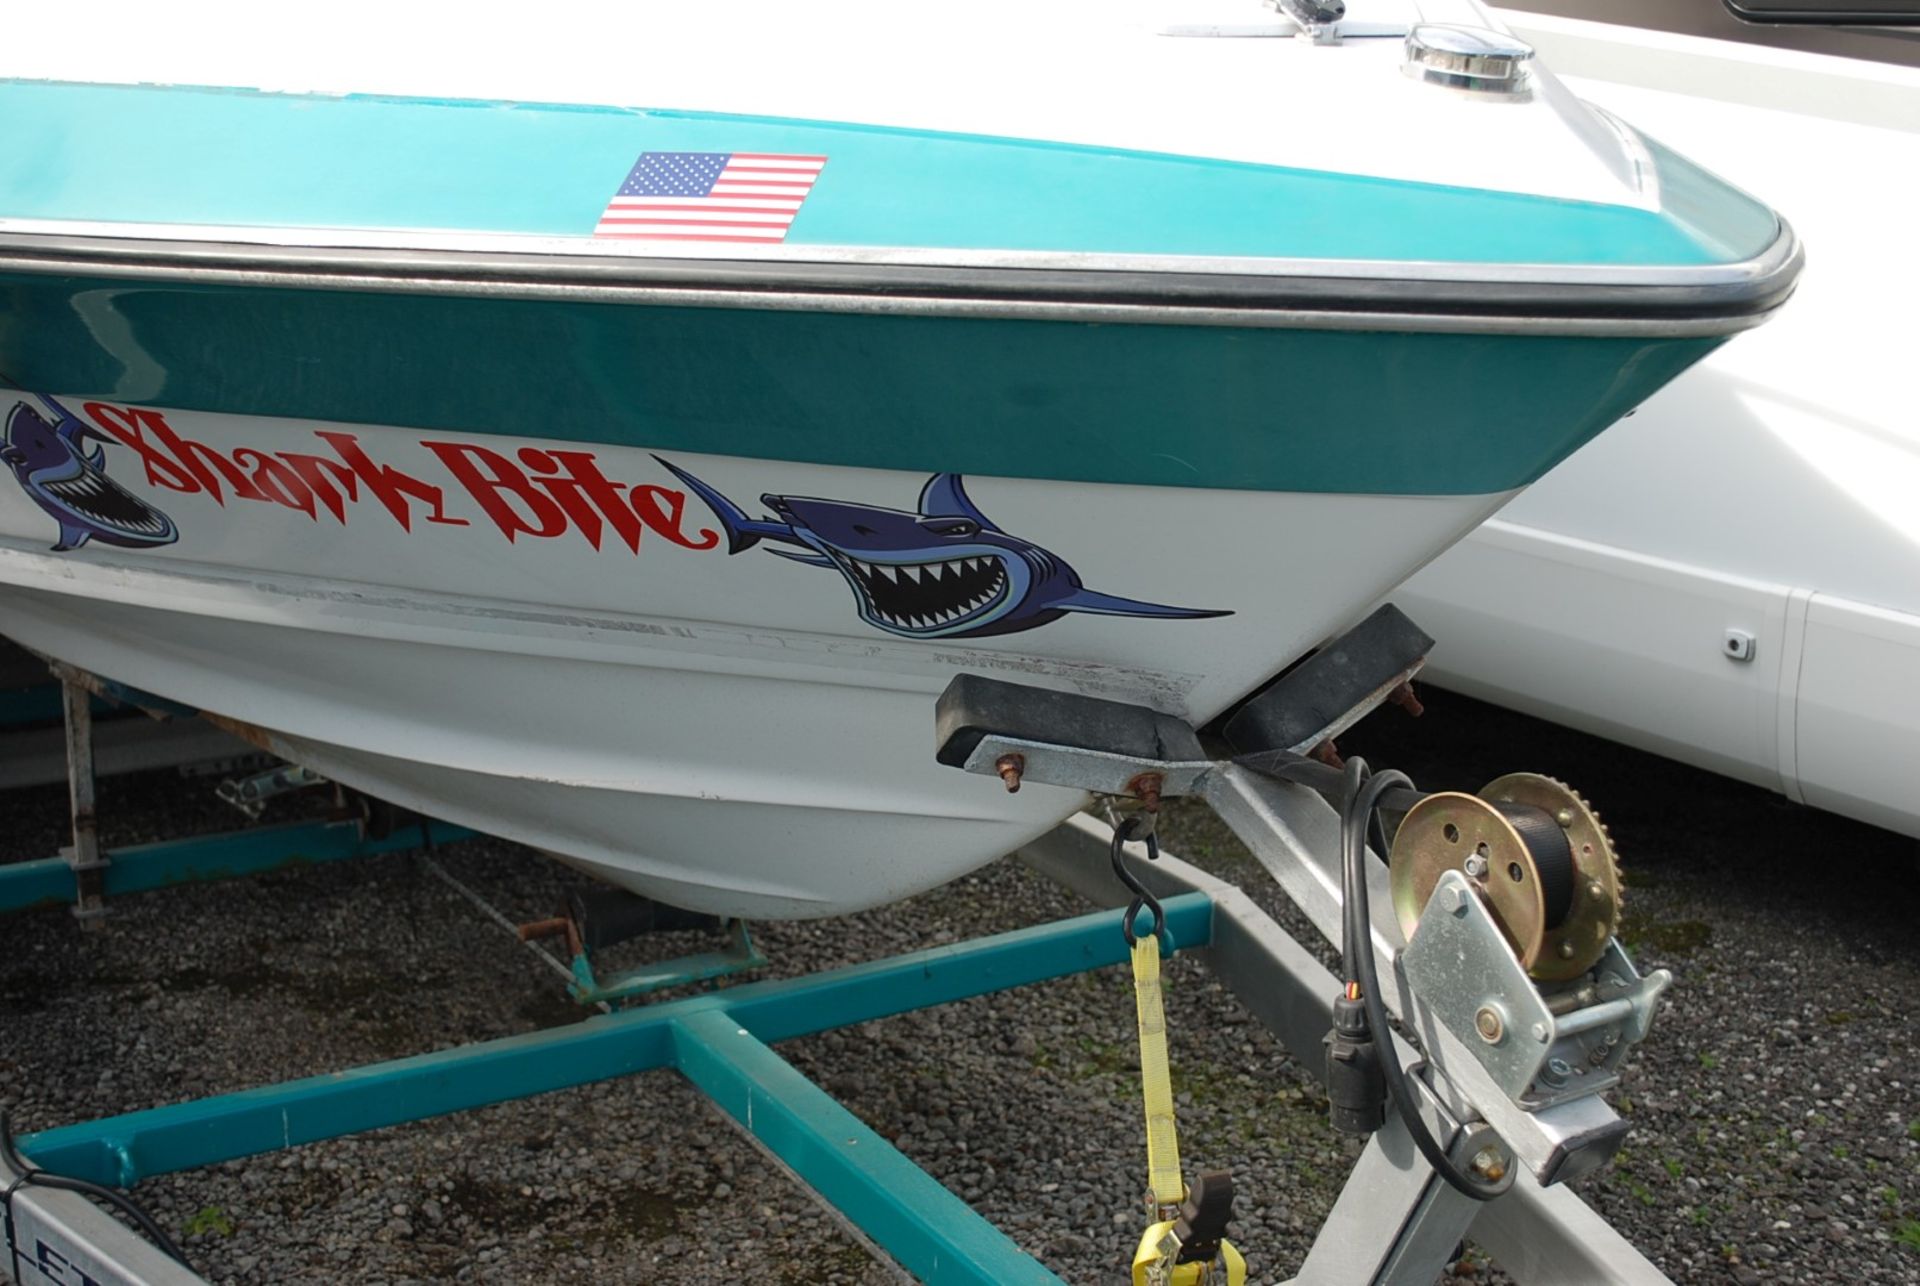 1 x "Sealiner 2002" 20ft Cuddy Outboard Engine Boat - Refitted Inside & Out - Includes Trailer - - Image 3 of 38